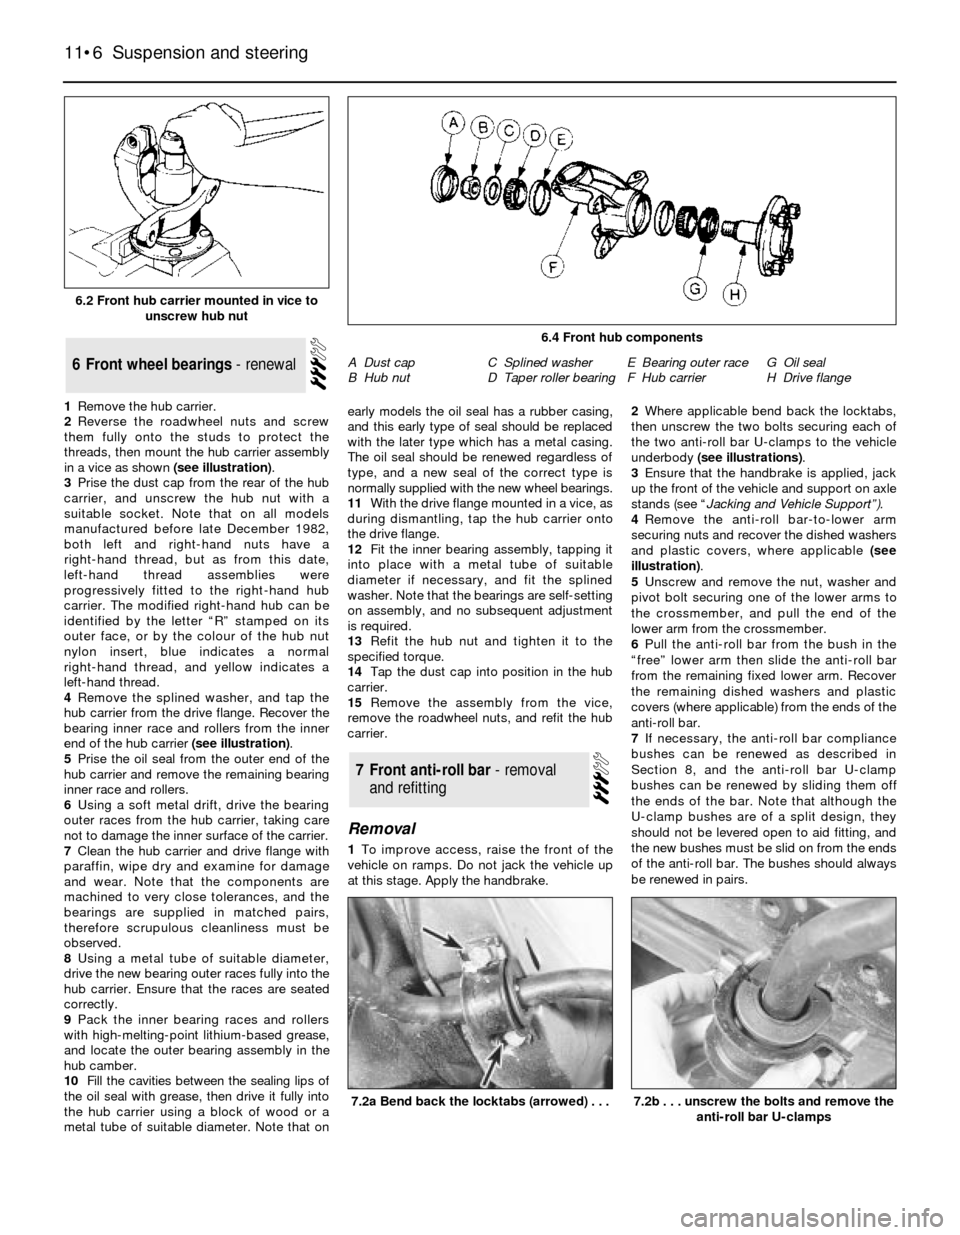 FORD SIERRA 1989 2.G Suspension And Steering Workshop Manual 1Remove the hub carrier.
2Reverse the roadwheel nuts and screw
them fully onto the studs to protect the
threads, then mount the hub carrier assembly
in a vice as shown (see illustration).
3Prise the d